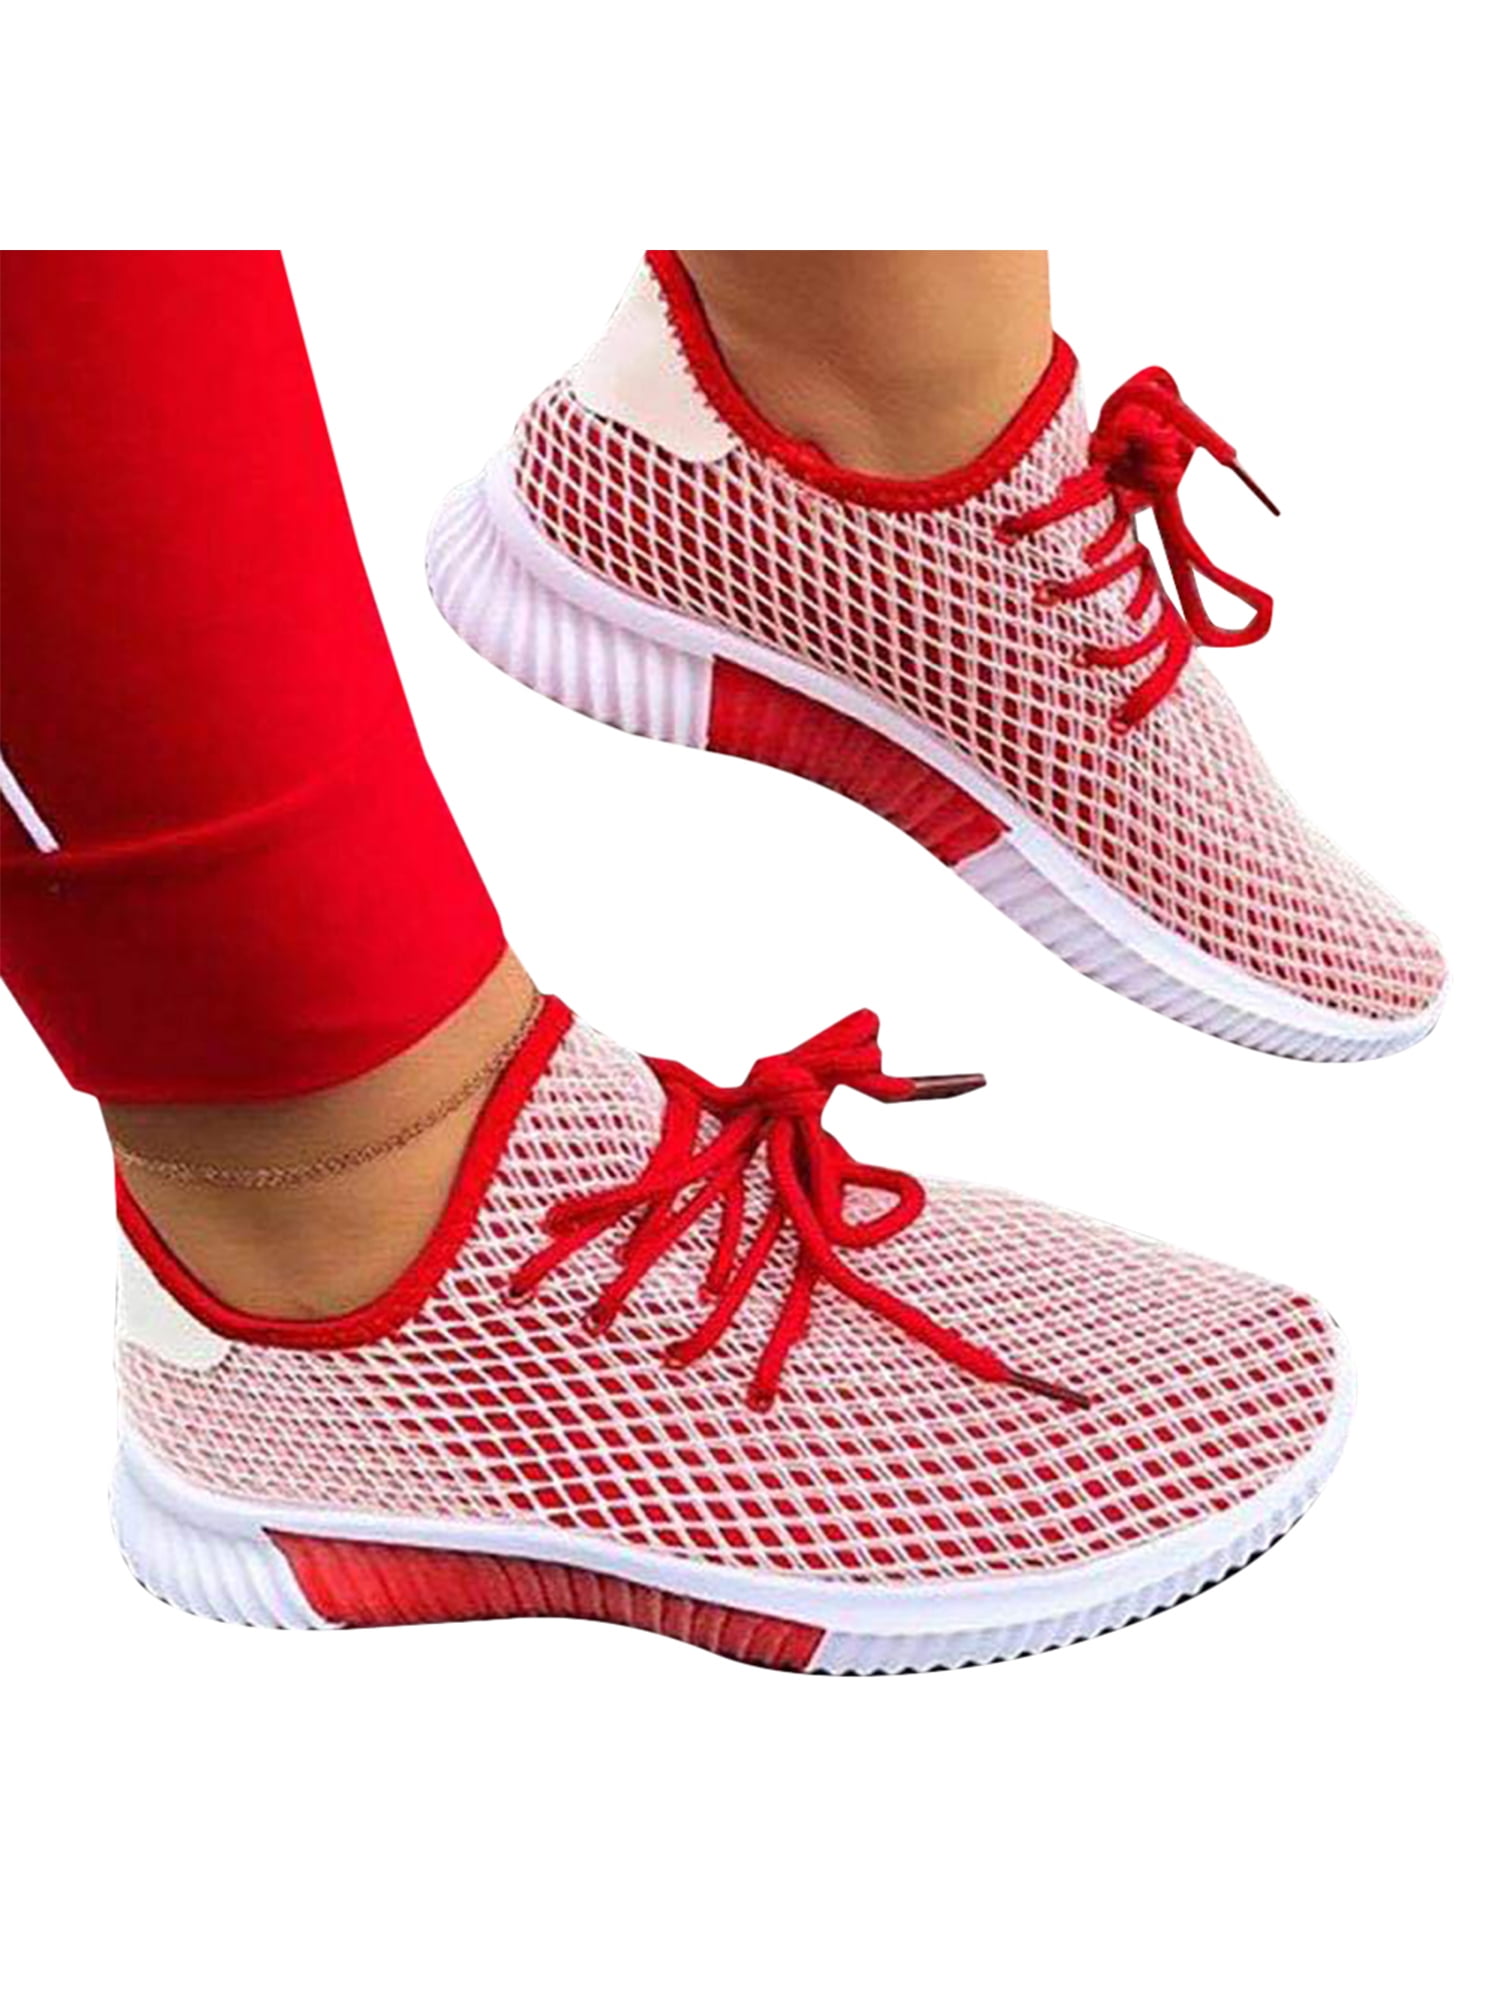 Women Mesh Floral Breathable Sneakers Lace Up Flat Canvas Shoes Comfy Sport Size 